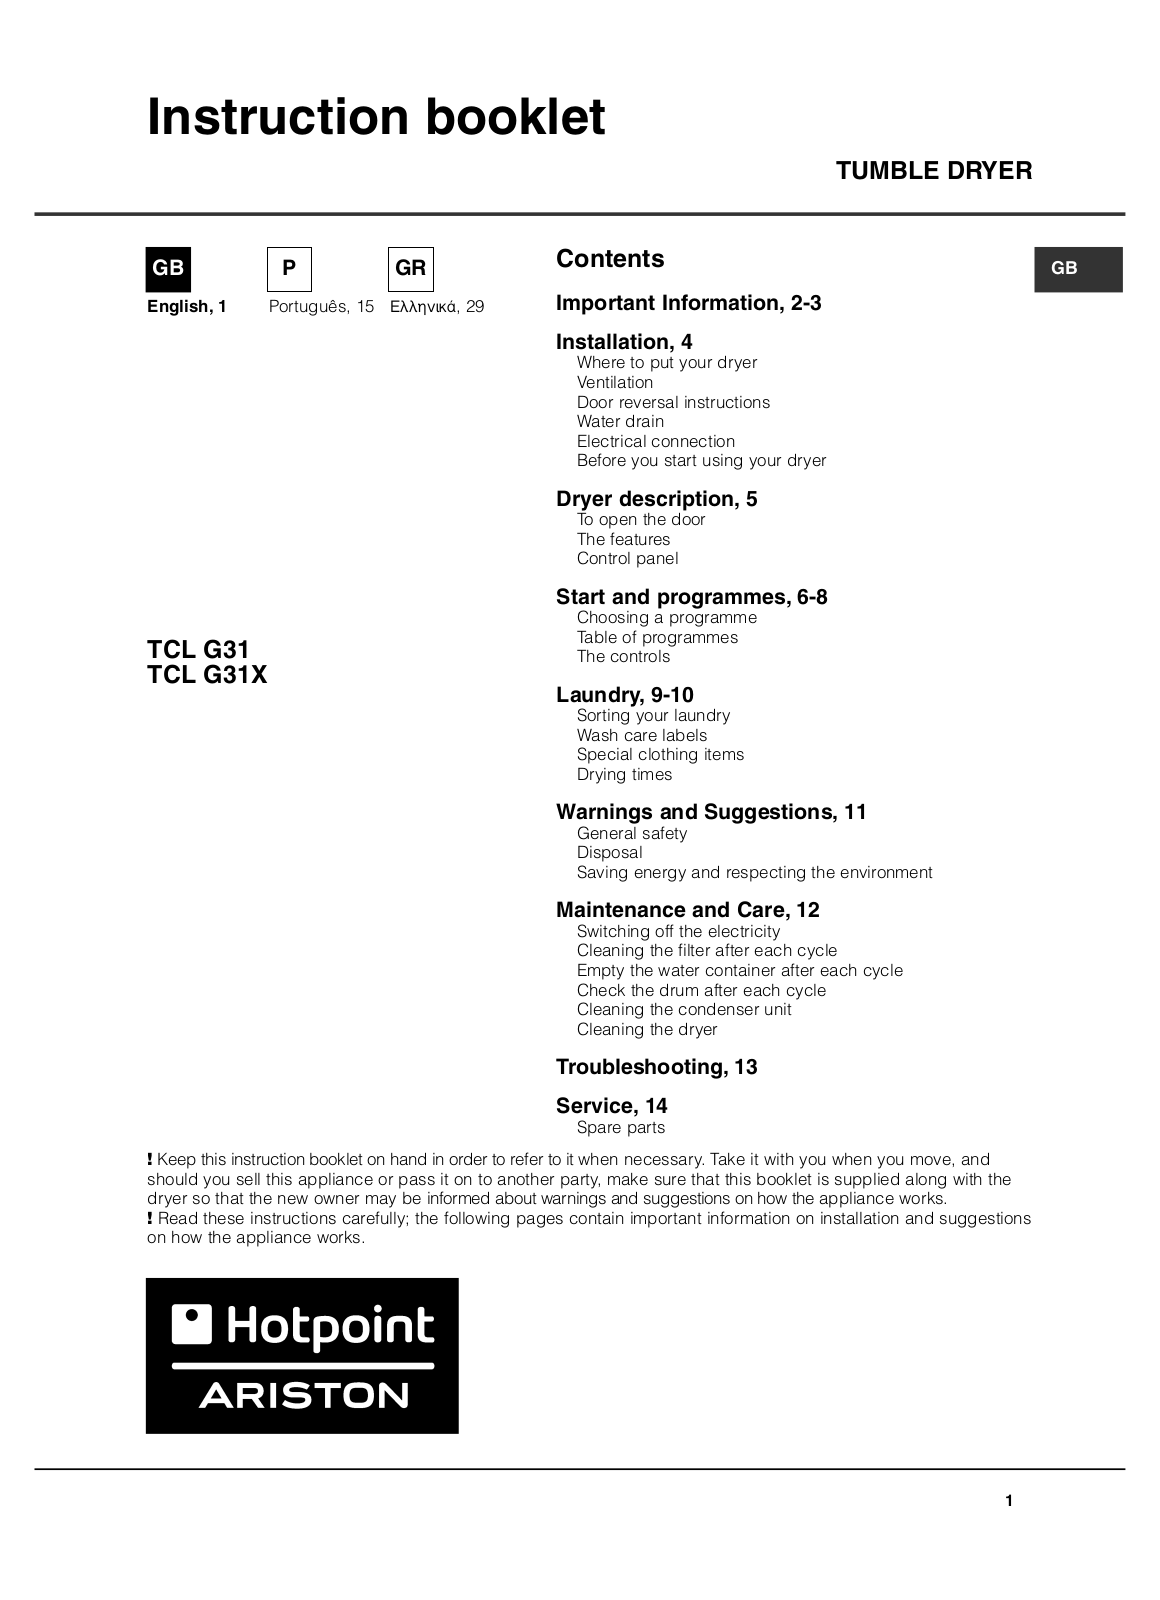 Hotpoint TCL G31 Manual